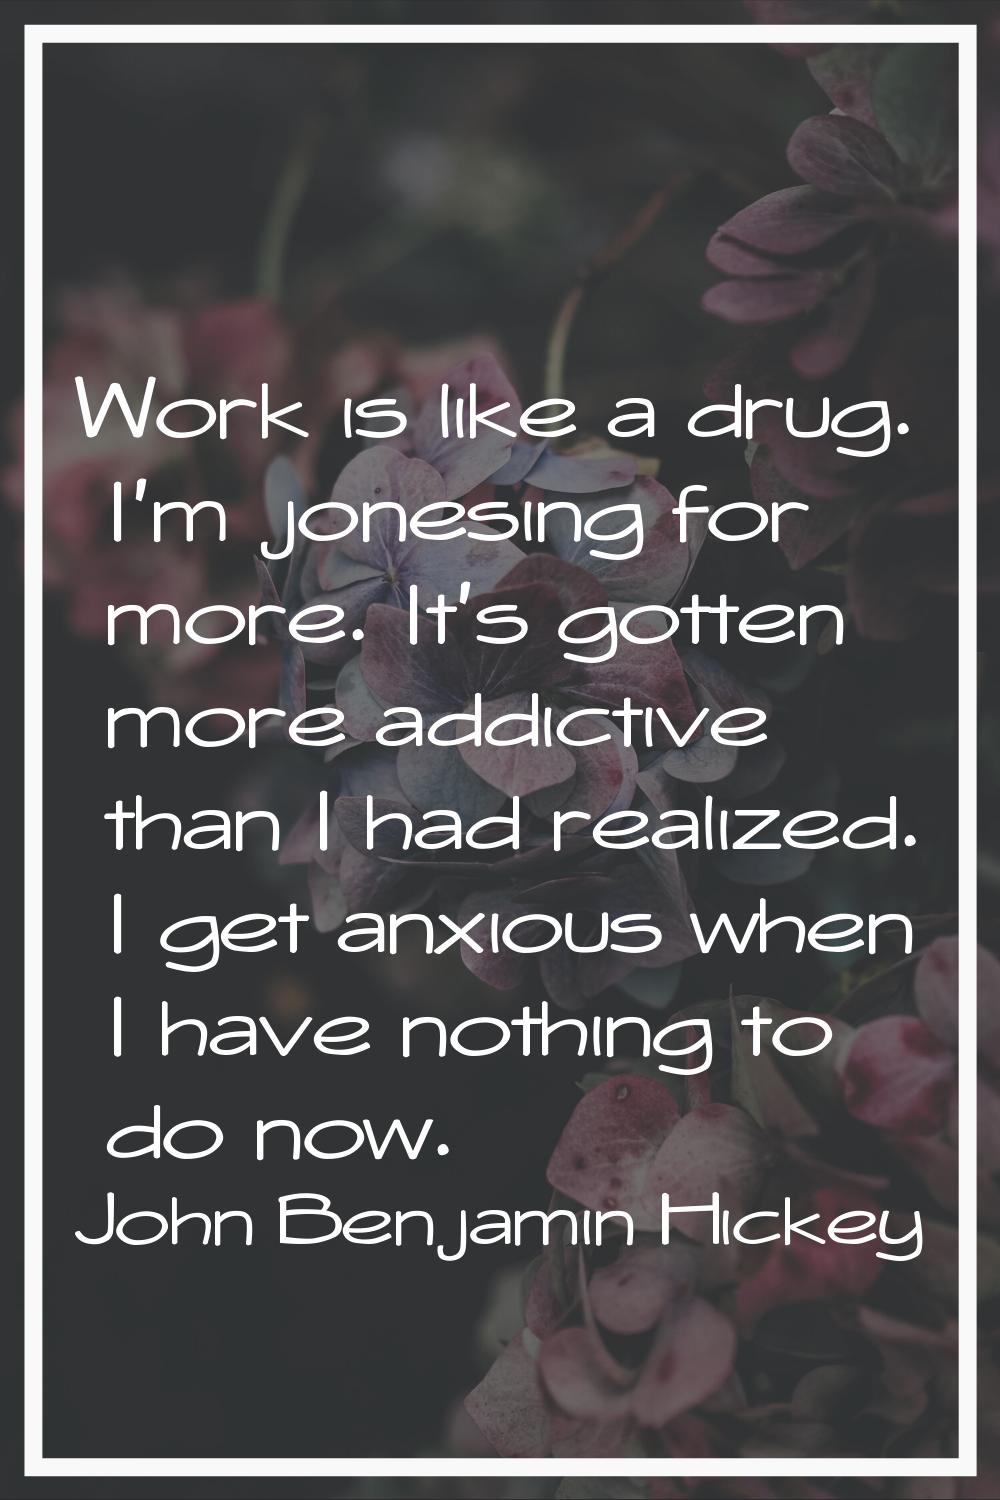 Work is like a drug. I'm jonesing for more. It's gotten more addictive than I had realized. I get a